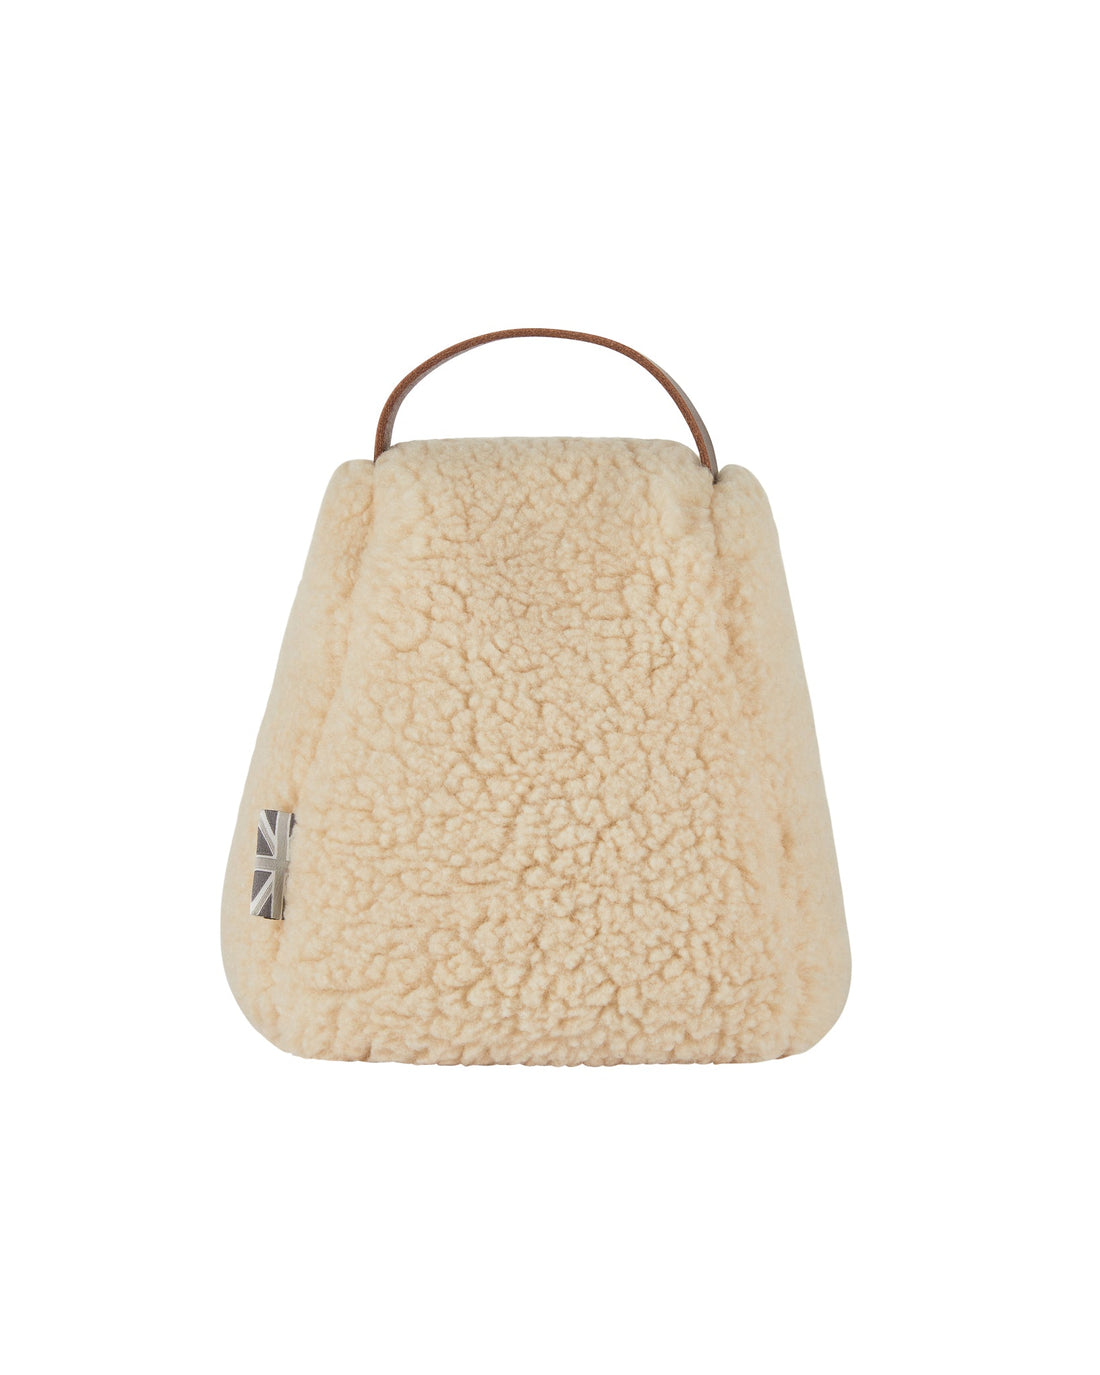 Bone sherpa doorstop by Chalk, filled with calming lavender for functional and aromatic home decor.